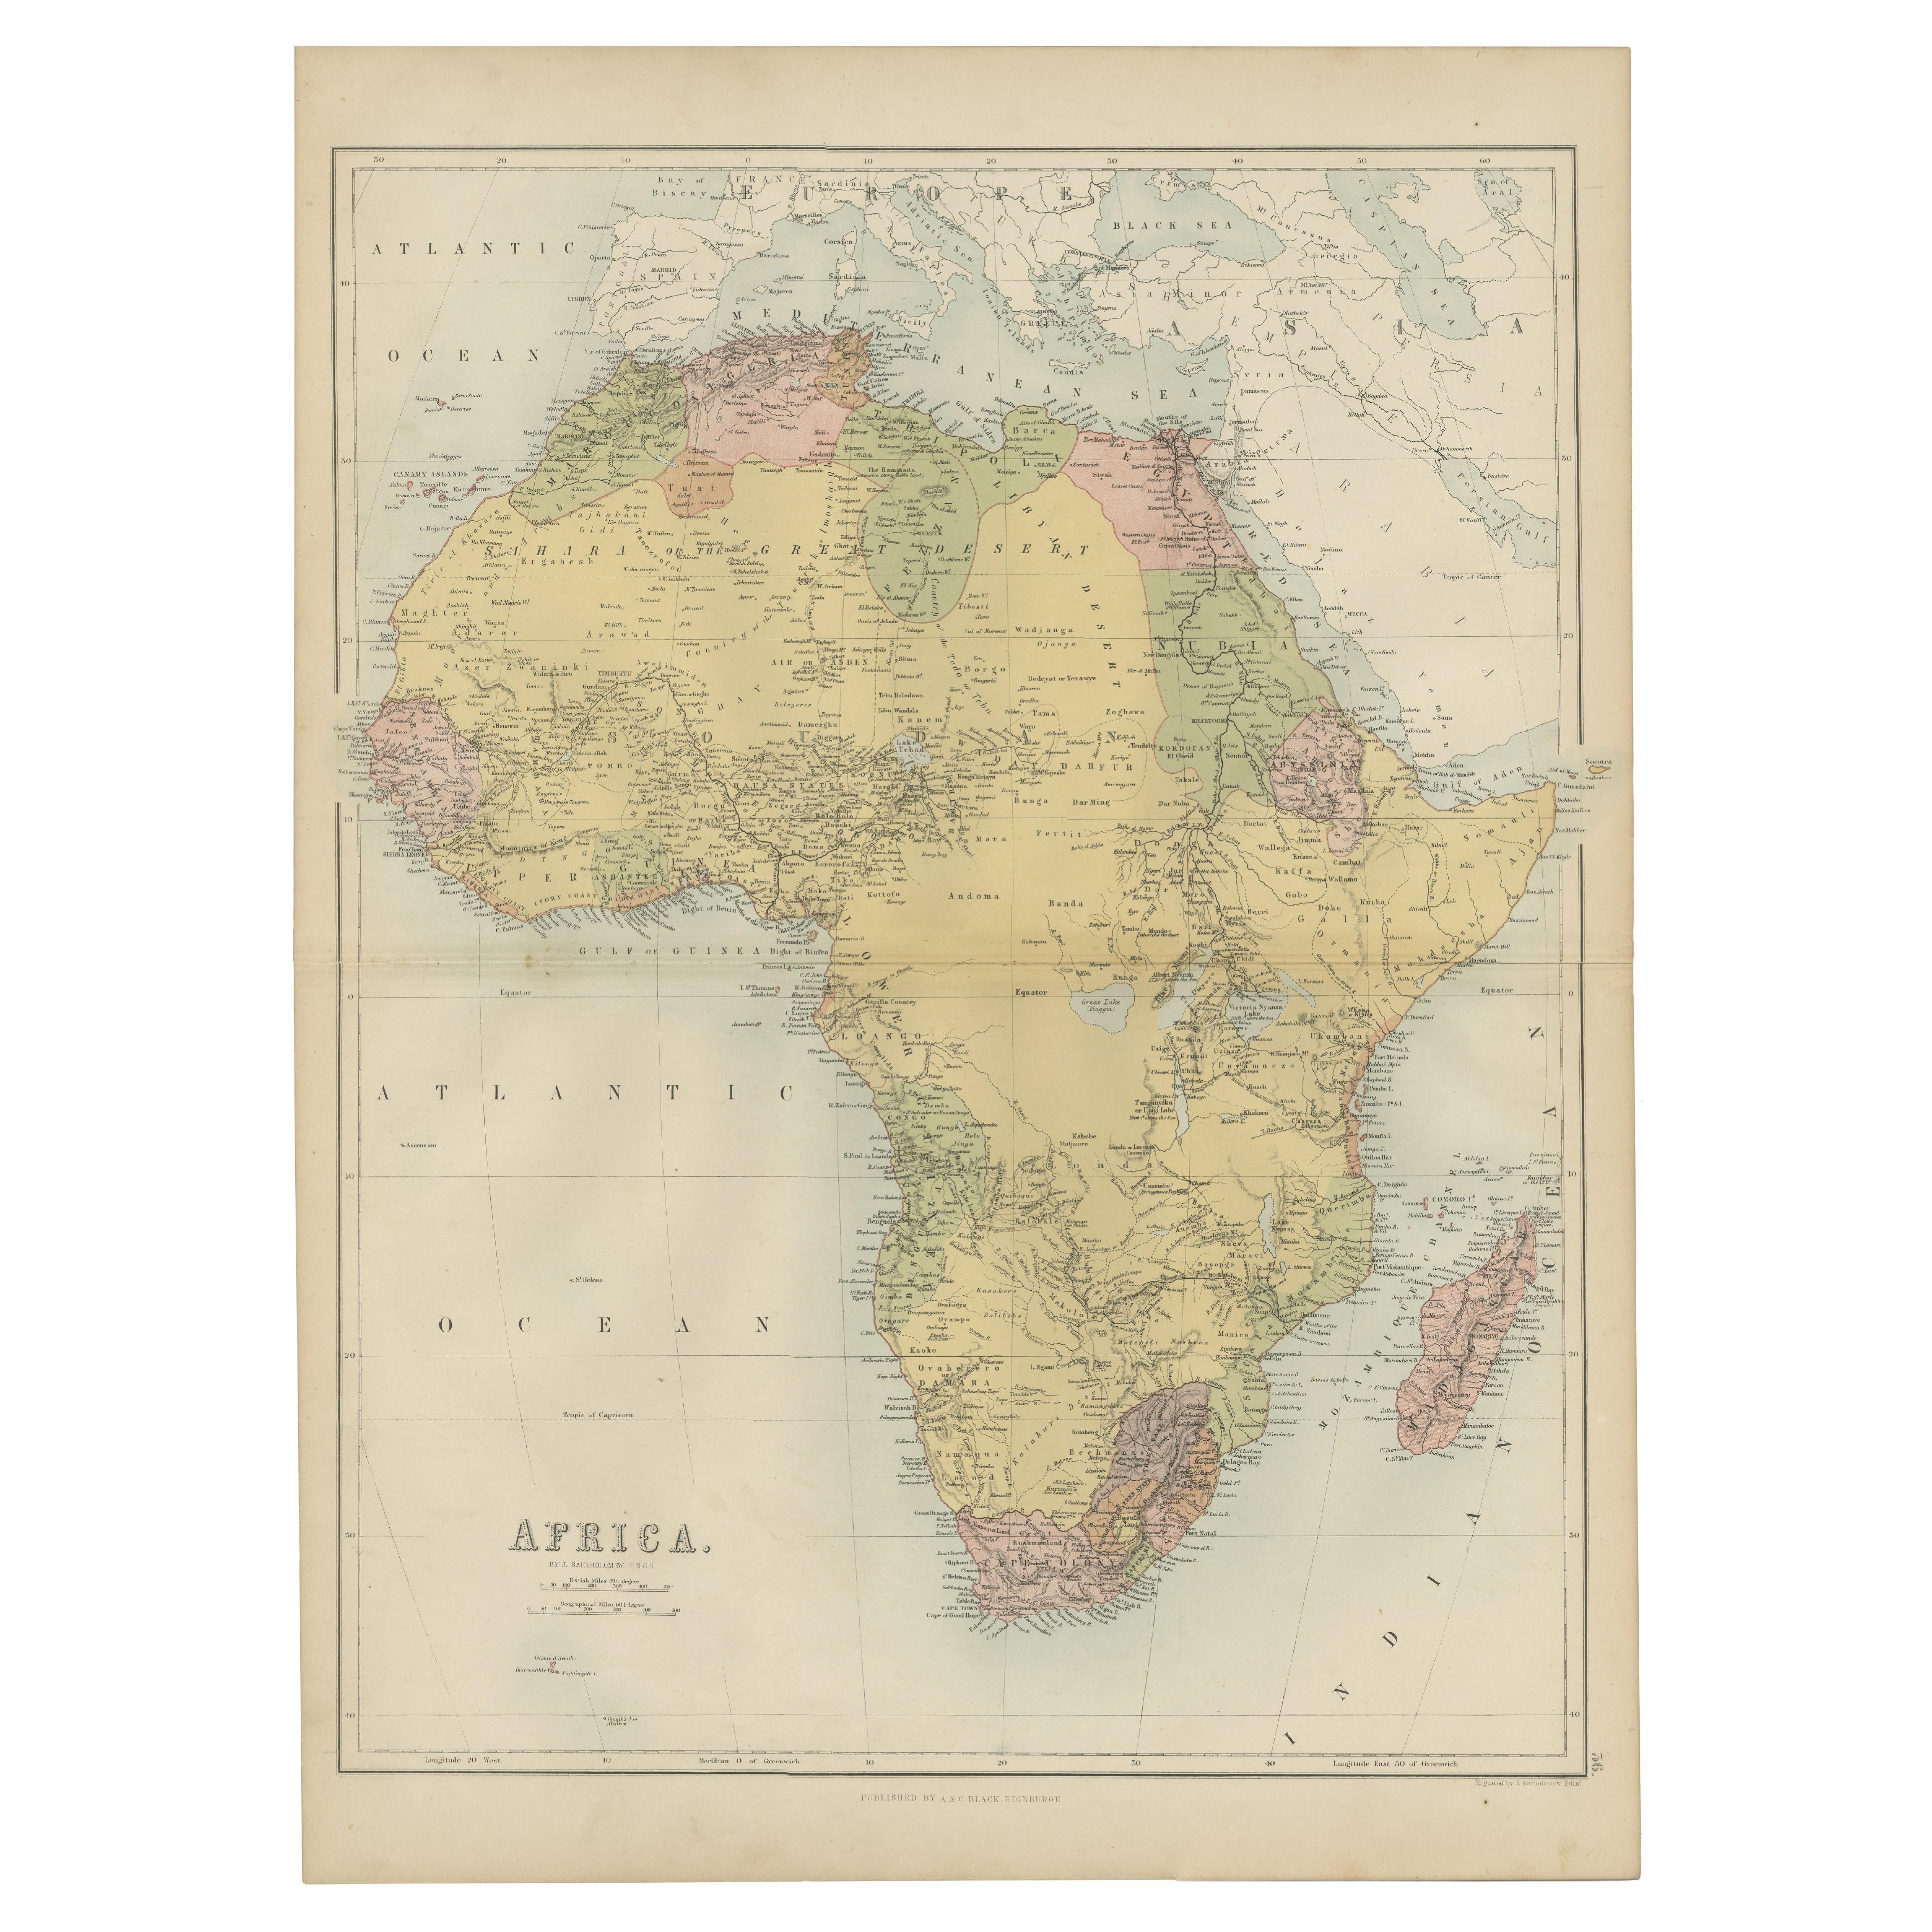 Antique Map of Africa by A & C, Black, 1870